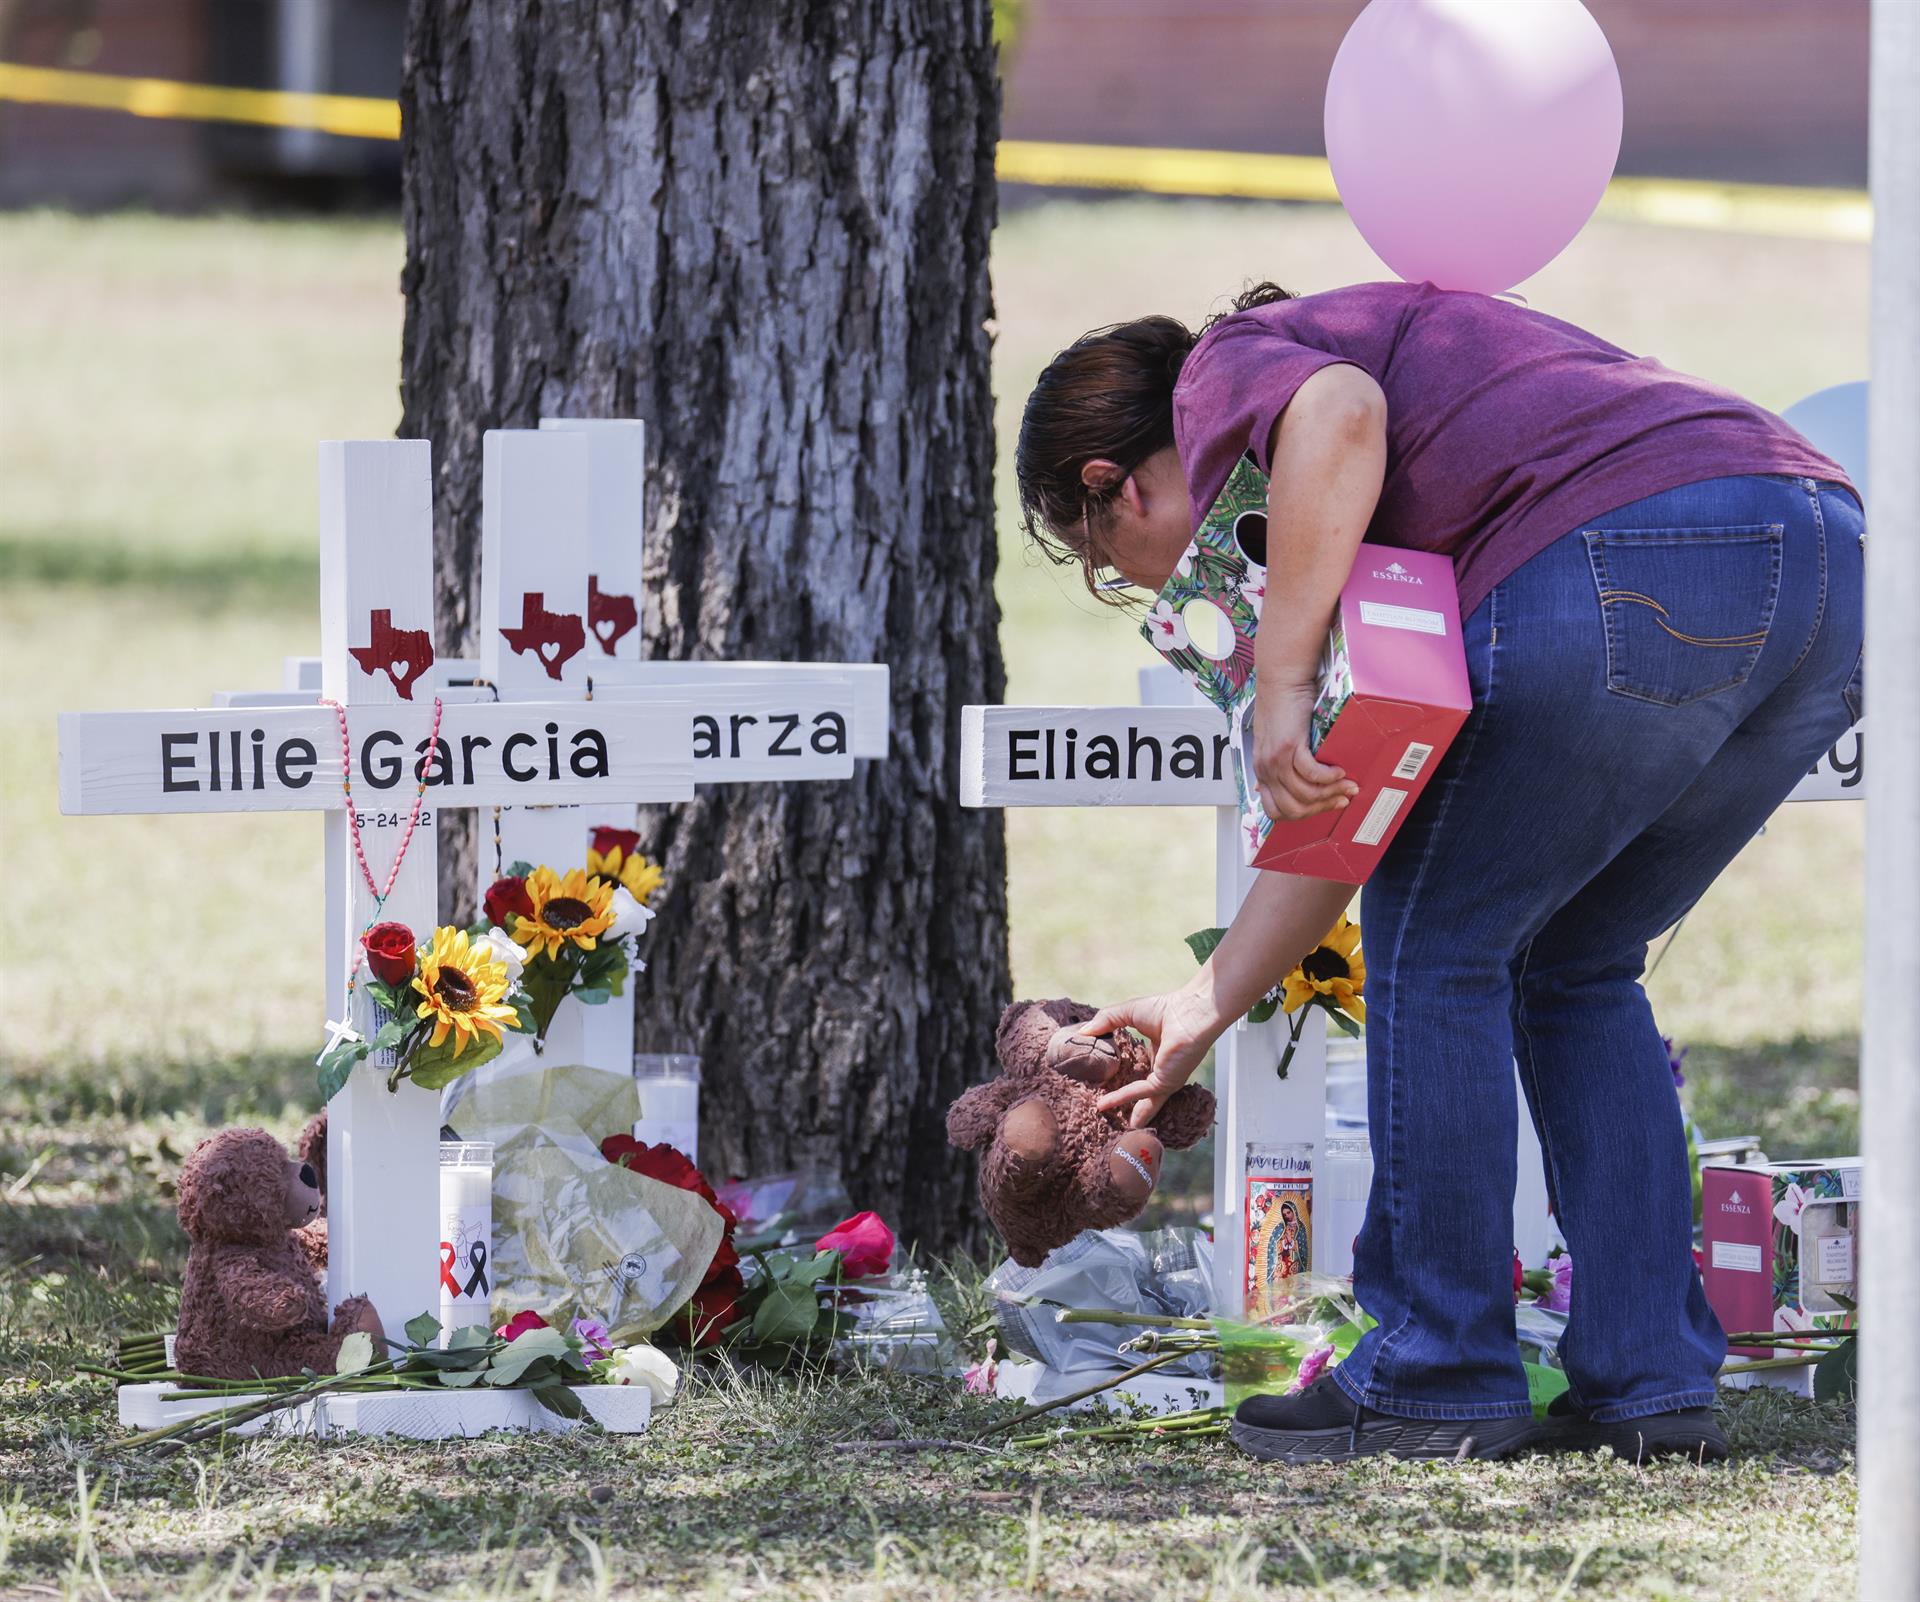 Uvalde (United States), 26/05/2022.- A woman places a stuffed animal by a cross bearing a victim's name following a mass shooting at the Robb Elementary School in Uvalde, Texas, USA, 26 May 2022. According to Texas officials, at least 19 children and two adults were killed in the shooting on 24 May. The eighteen-year-old gunman was killed by responding officers. (Estados Unidos) EFE/EPA/TANNEN MAURY
